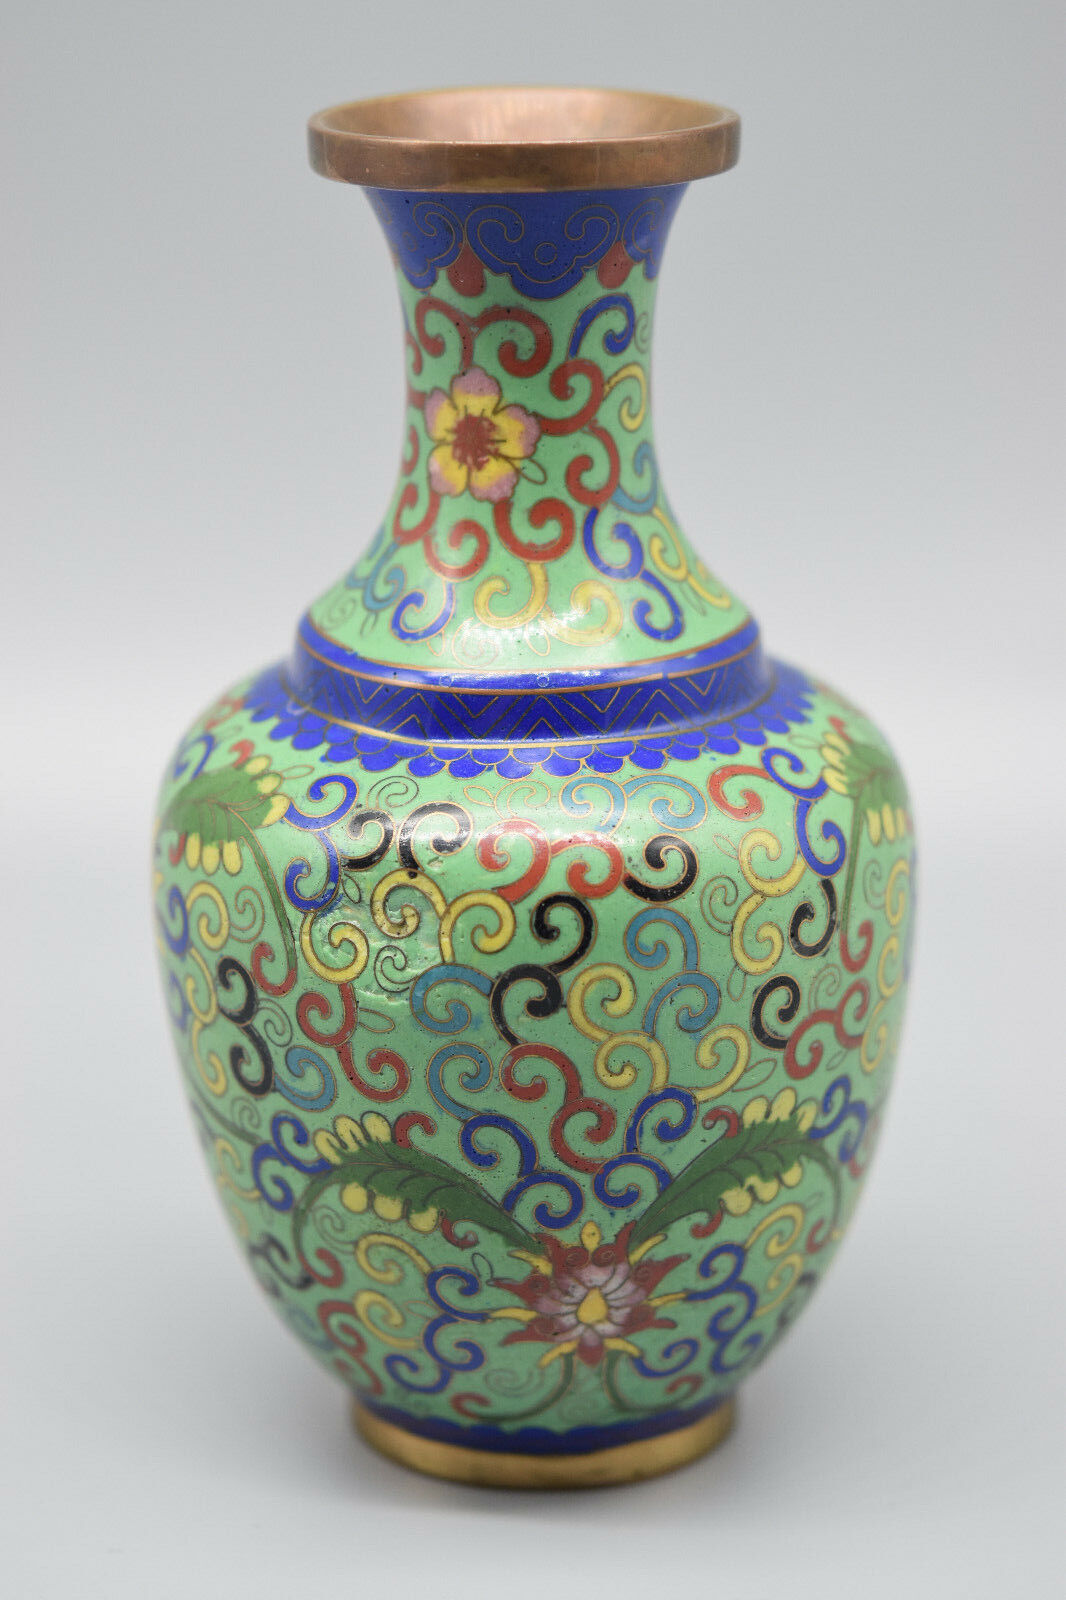 Vibrant ca. 1890's Chinese Export Cloisonne Vase, 6 1/4